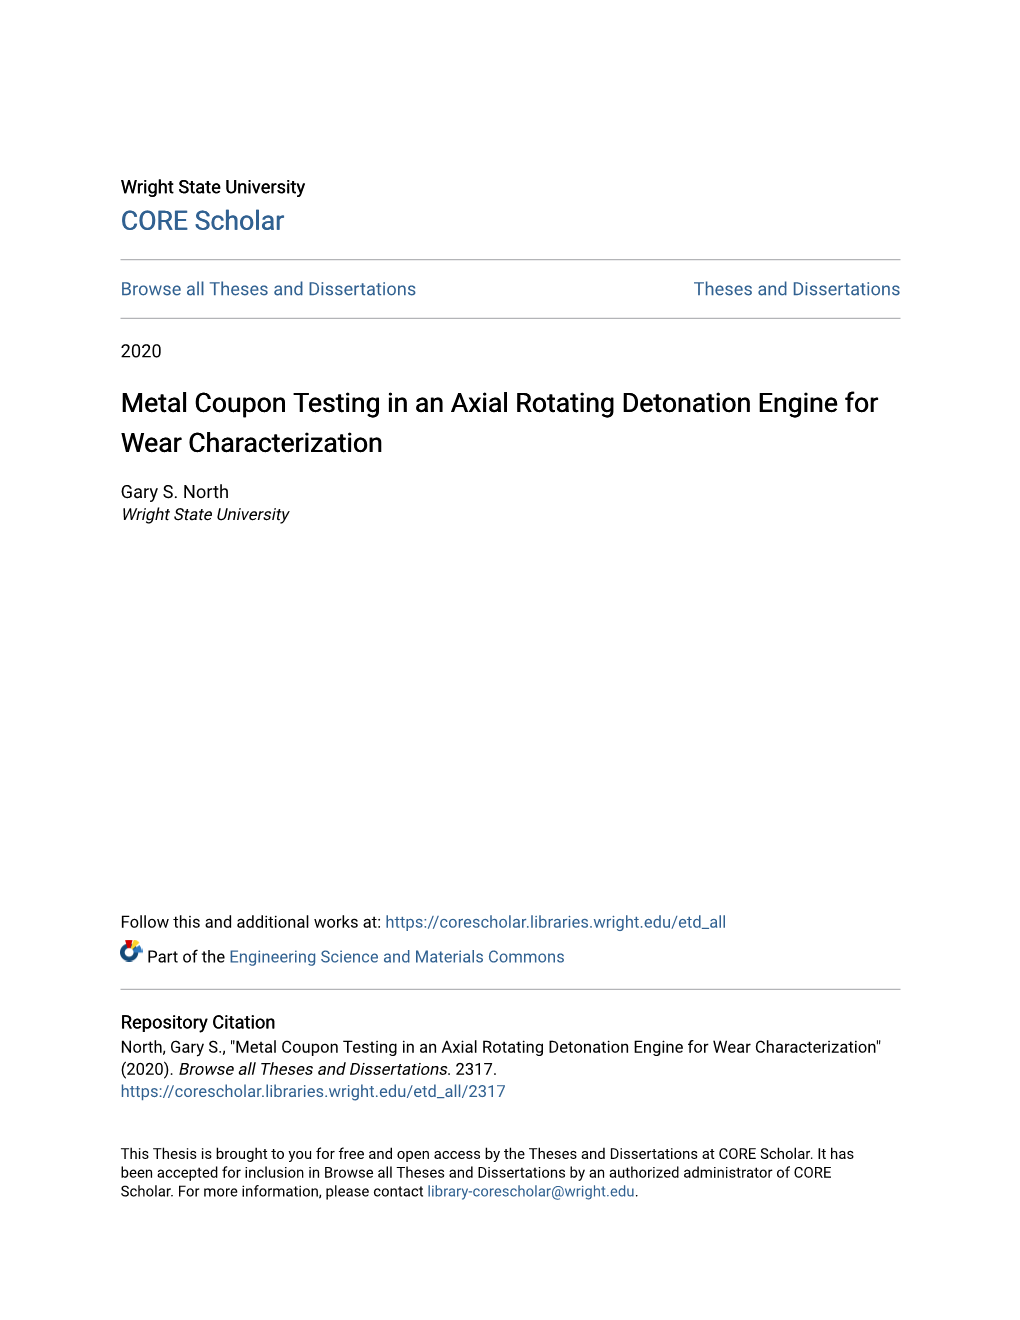 Metal Coupon Testing in an Axial Rotating Detonation Engine for Wear Characterization